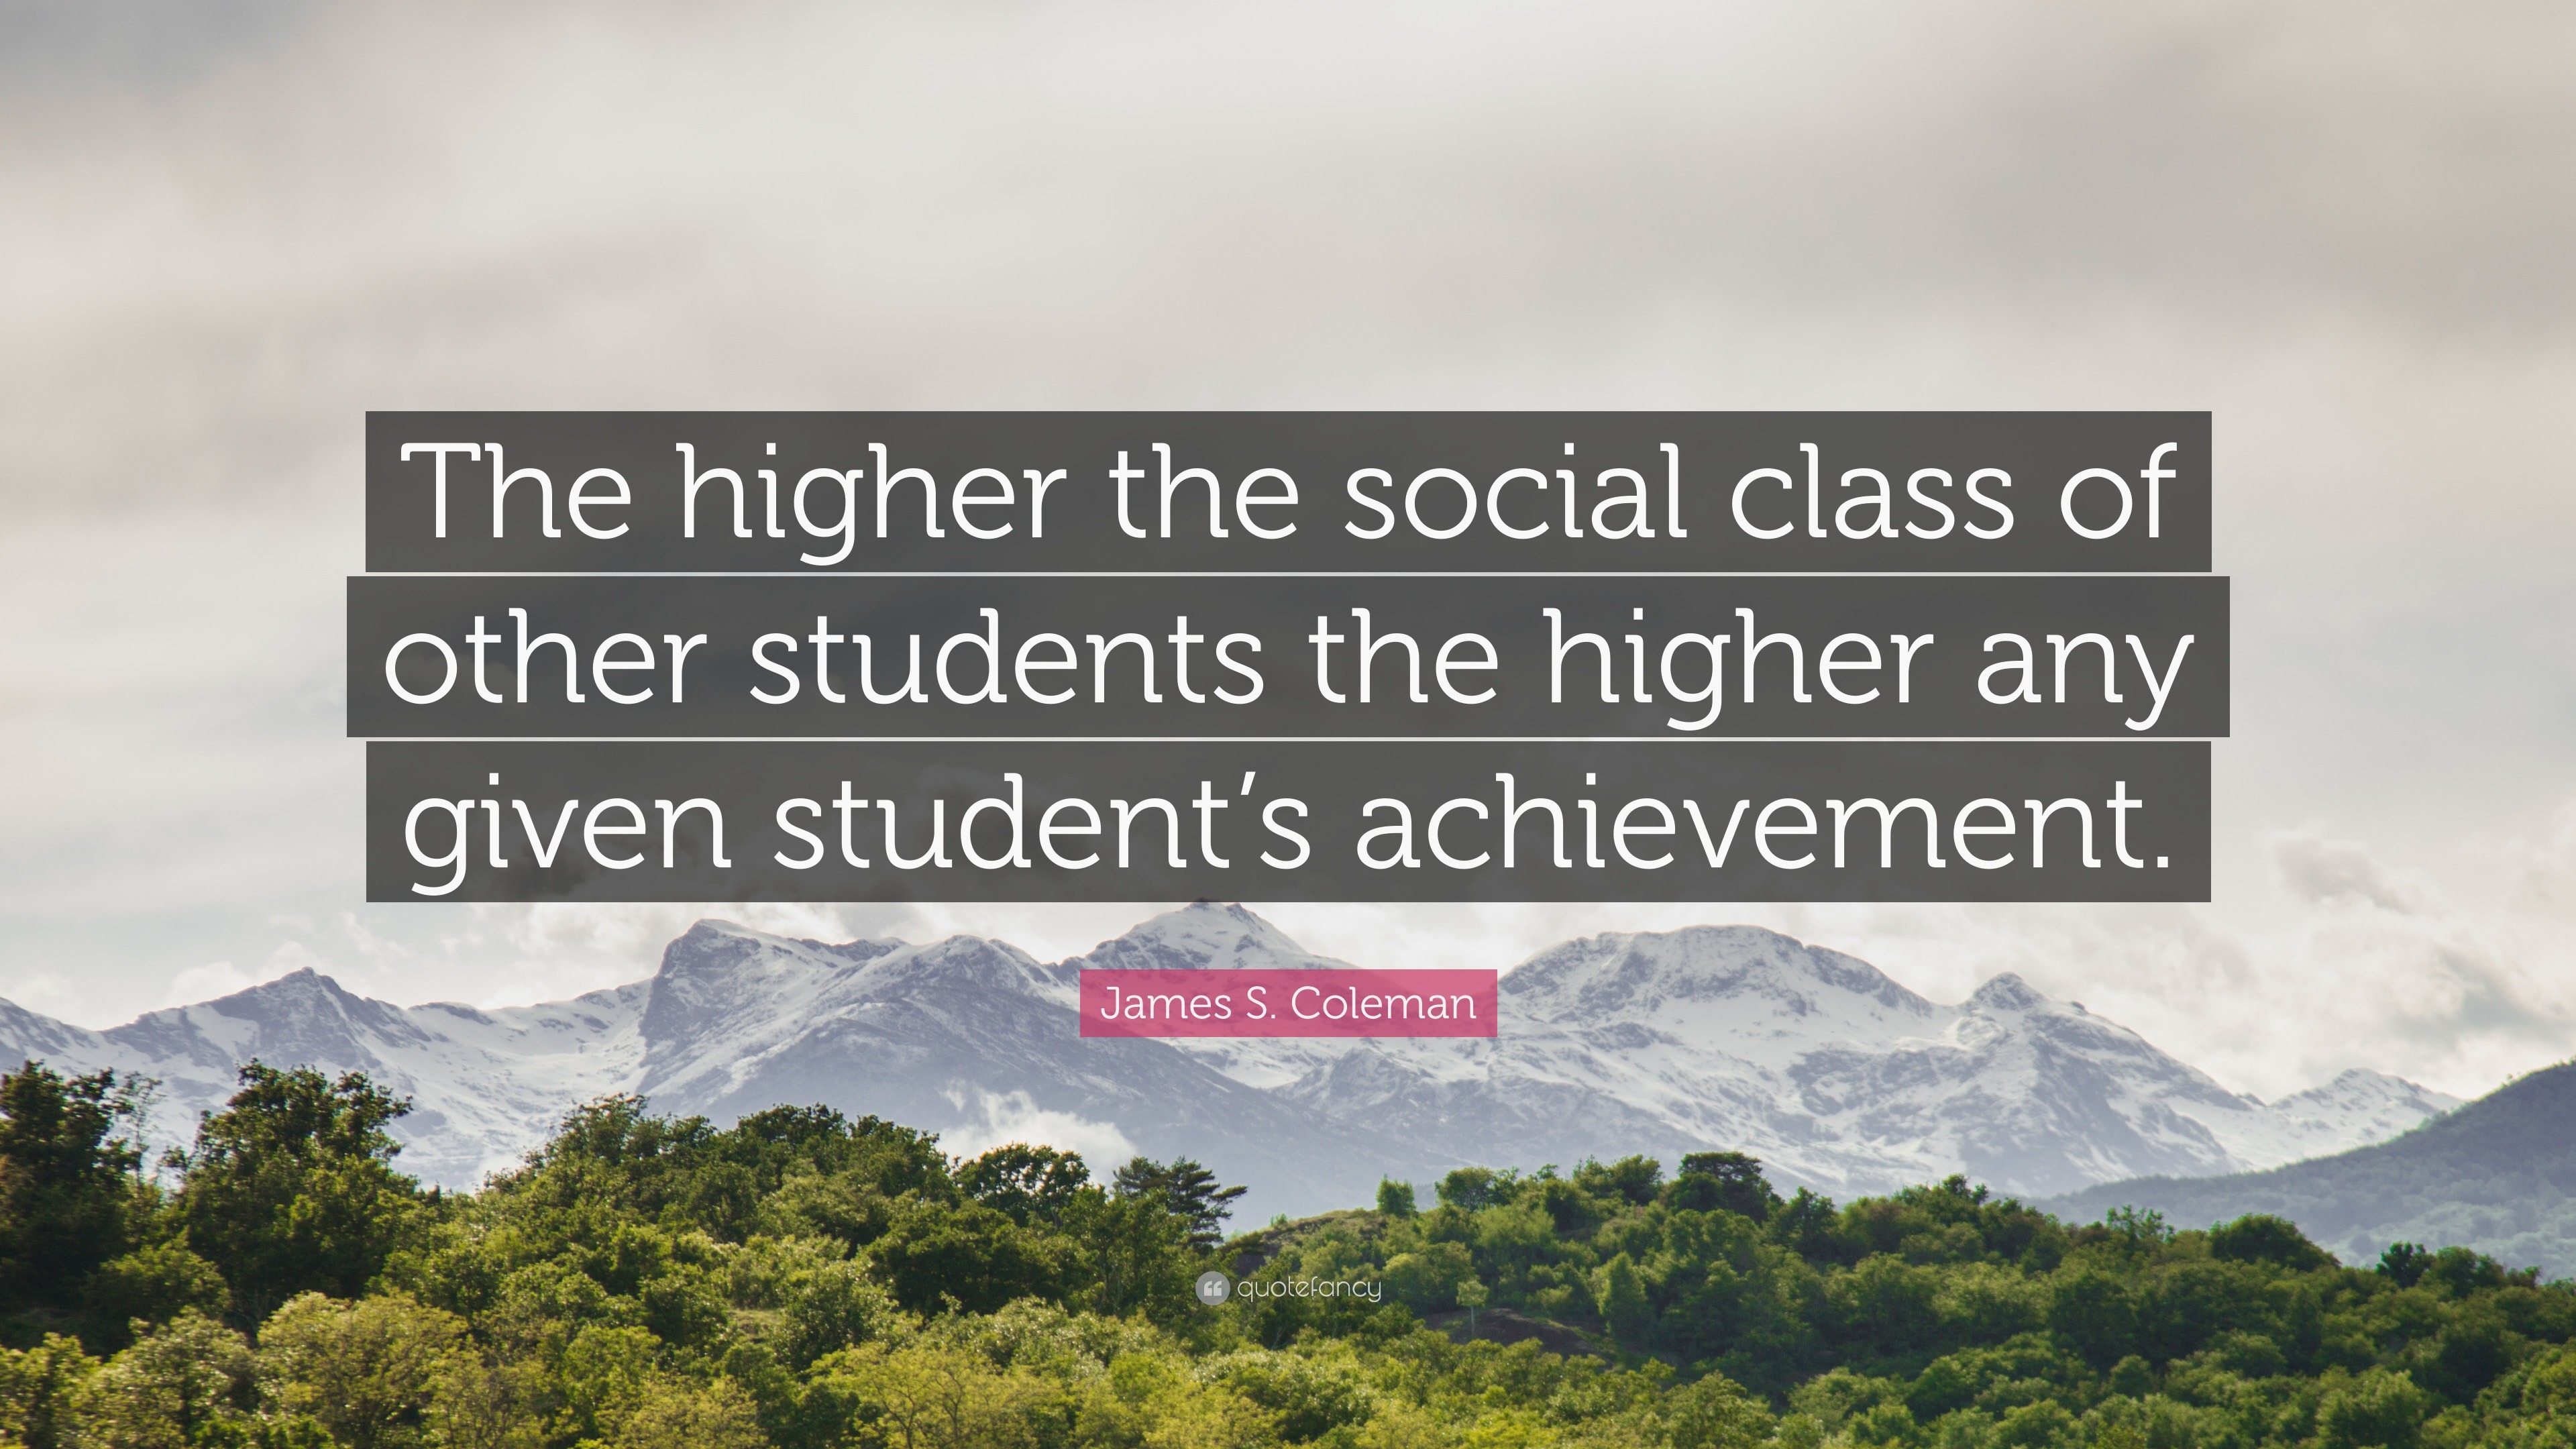 James S. Coleman Quote: "The higher the social class of other students the higher any given ...